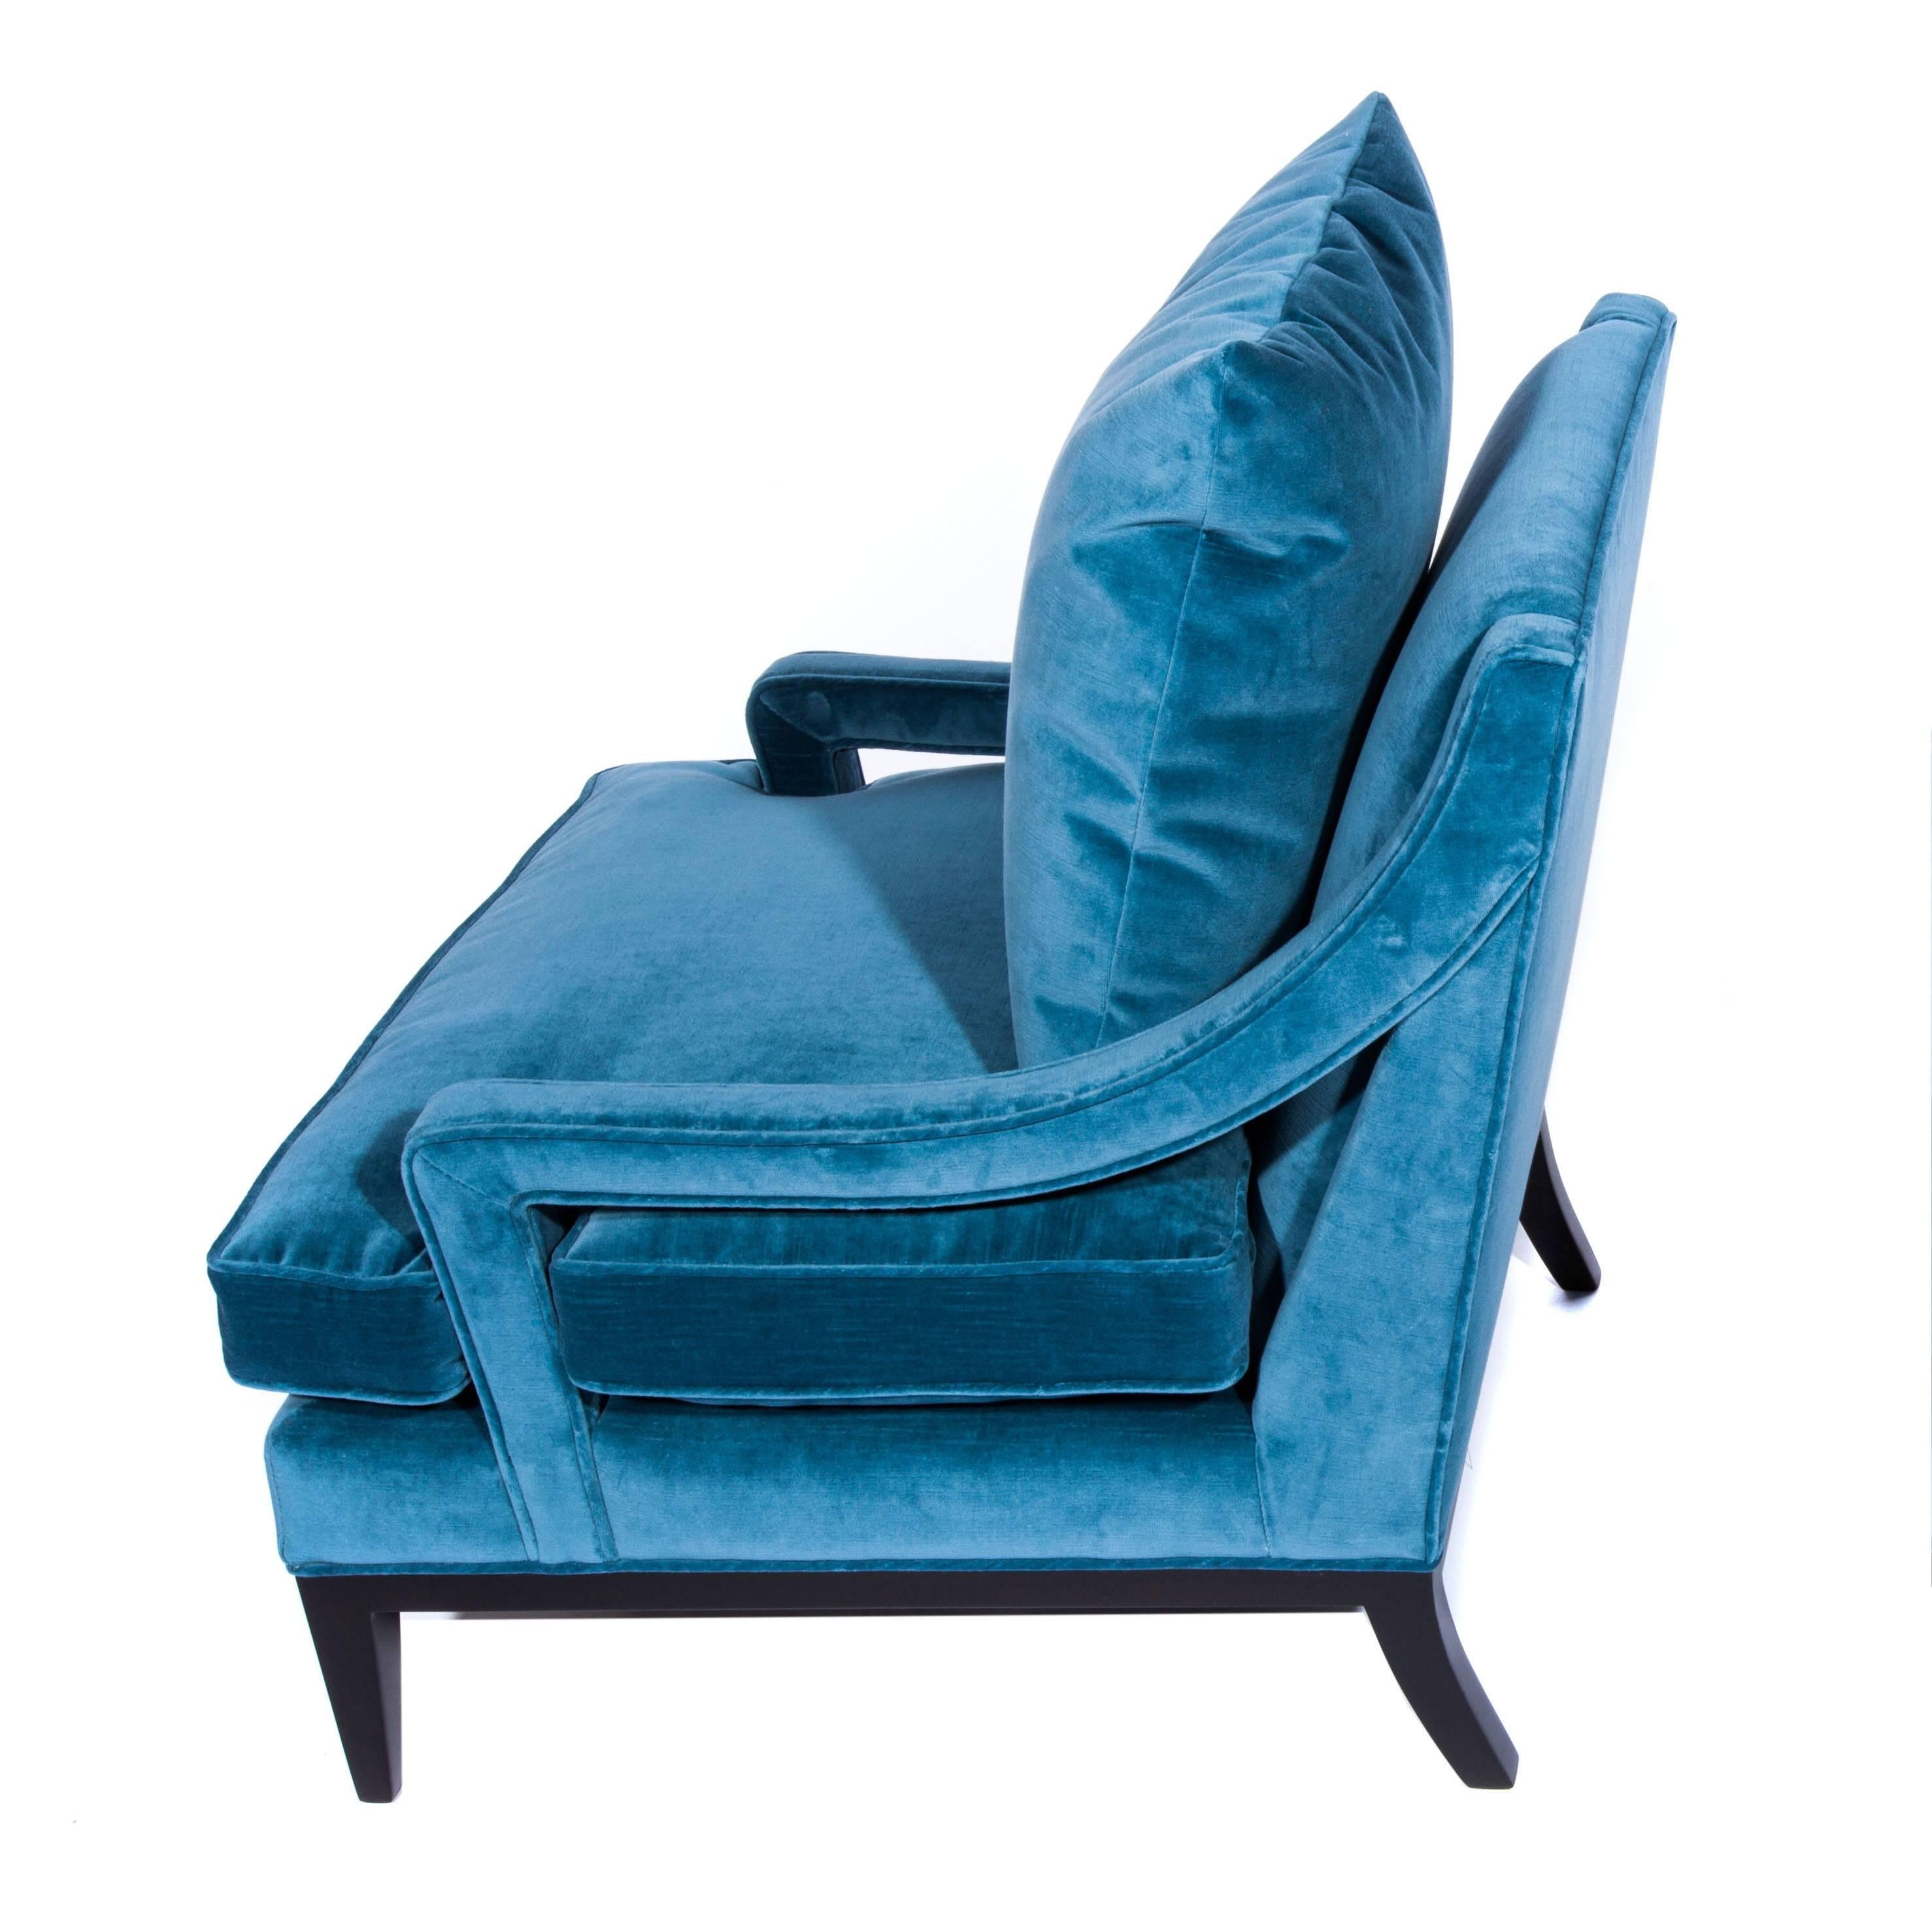 Beautifully scaled 1960s lounge chair with sloped, open-sided arms, supported by an ebonized-wood frame with tapered legs. Refinished and reupholstered in a rich blue cotton velvet with new foam. Includes optional matching feather-and-down back